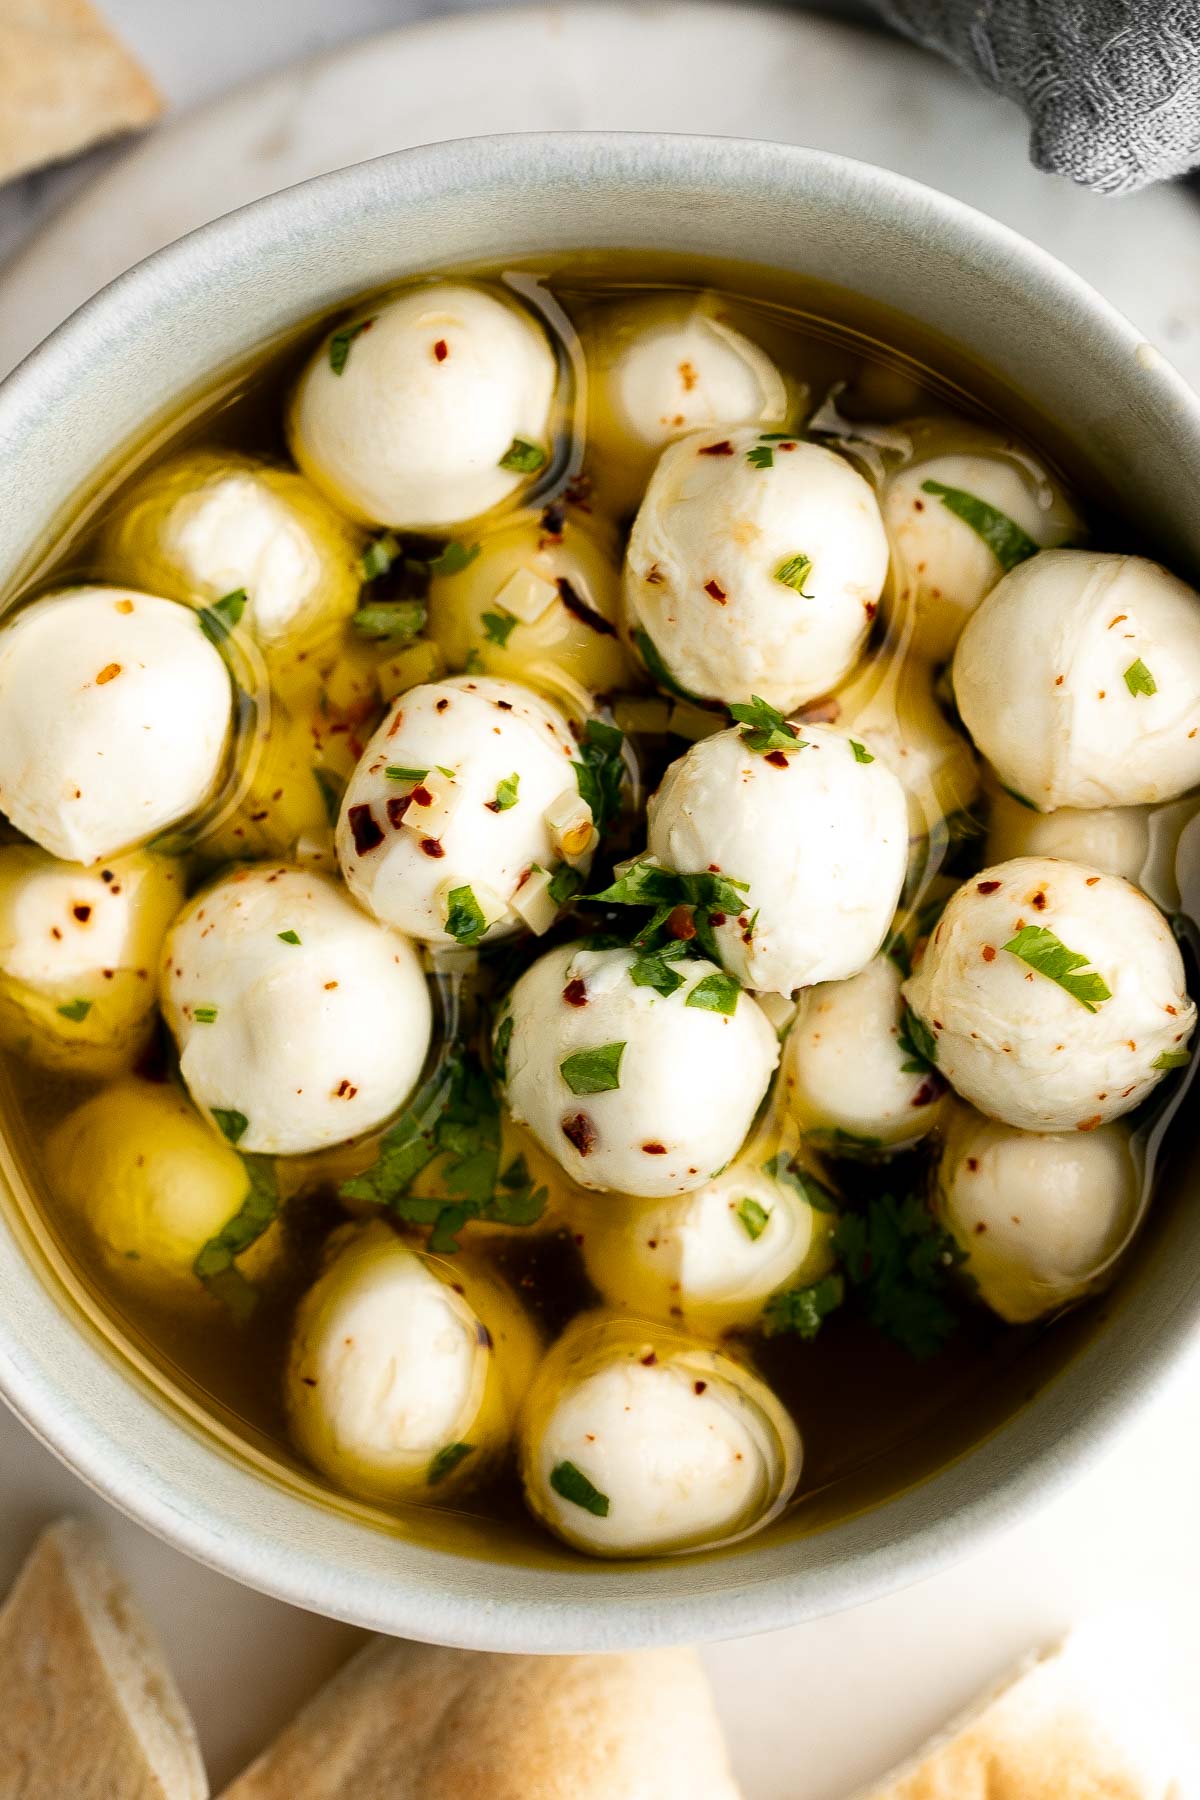 Marinated mozzarella balls is a delicious and simple yet stunning appetizer, made with fresh bocconcini soaked in olive oil, garlic, and fresh herbs. | aheadofthyme.com